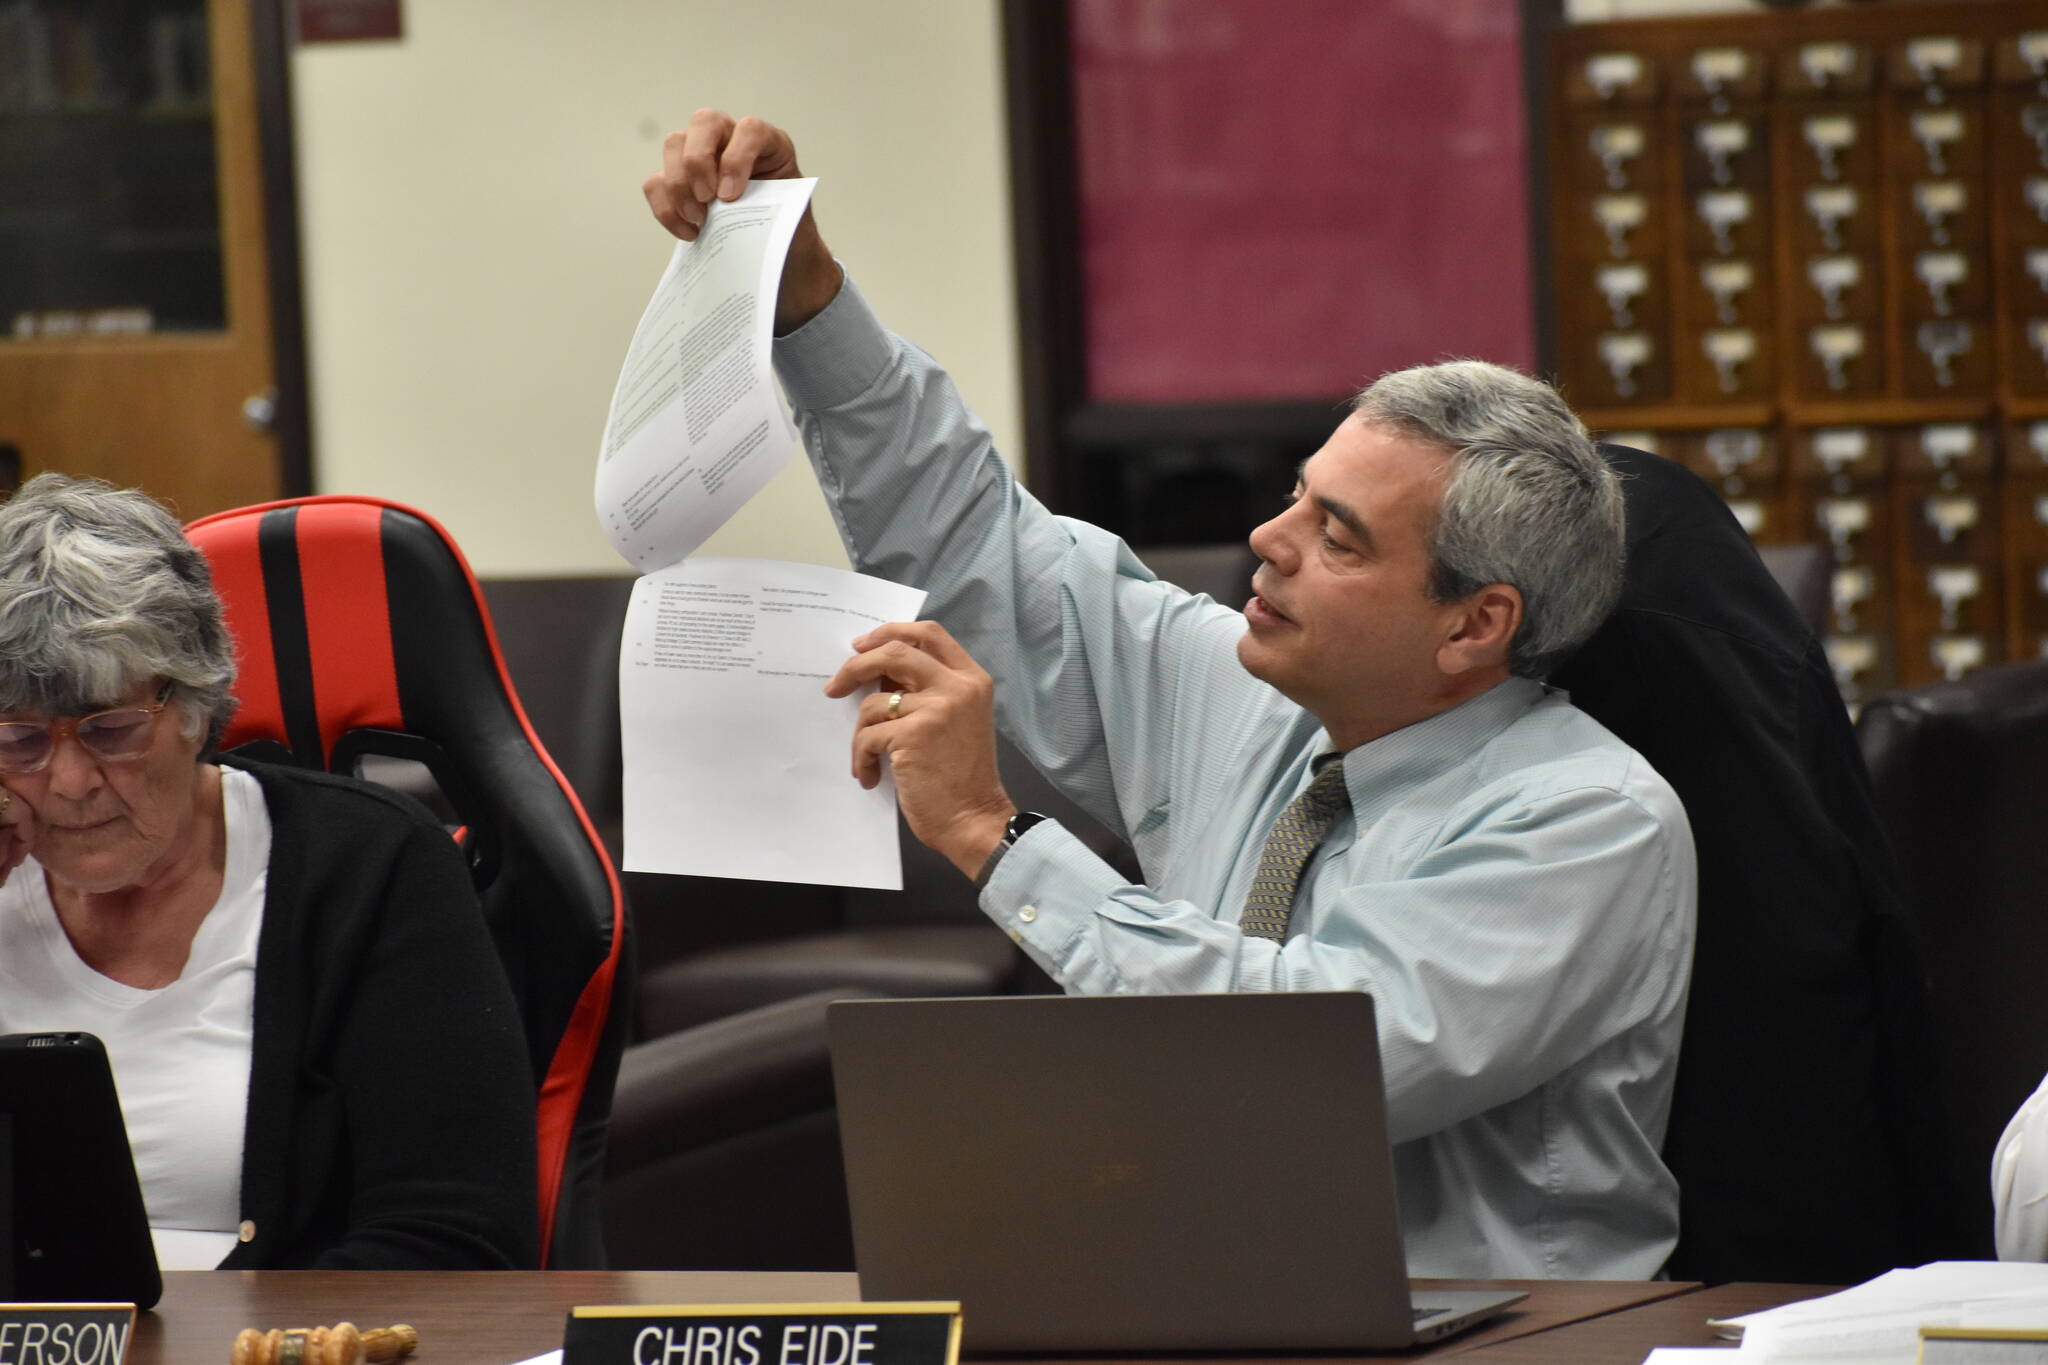 Board member Chris Eide displays spreadsheets Thursday evening containing public opinion gathered at the district’s community meetings on downsizing. (Clayton Franke / The Daily World)